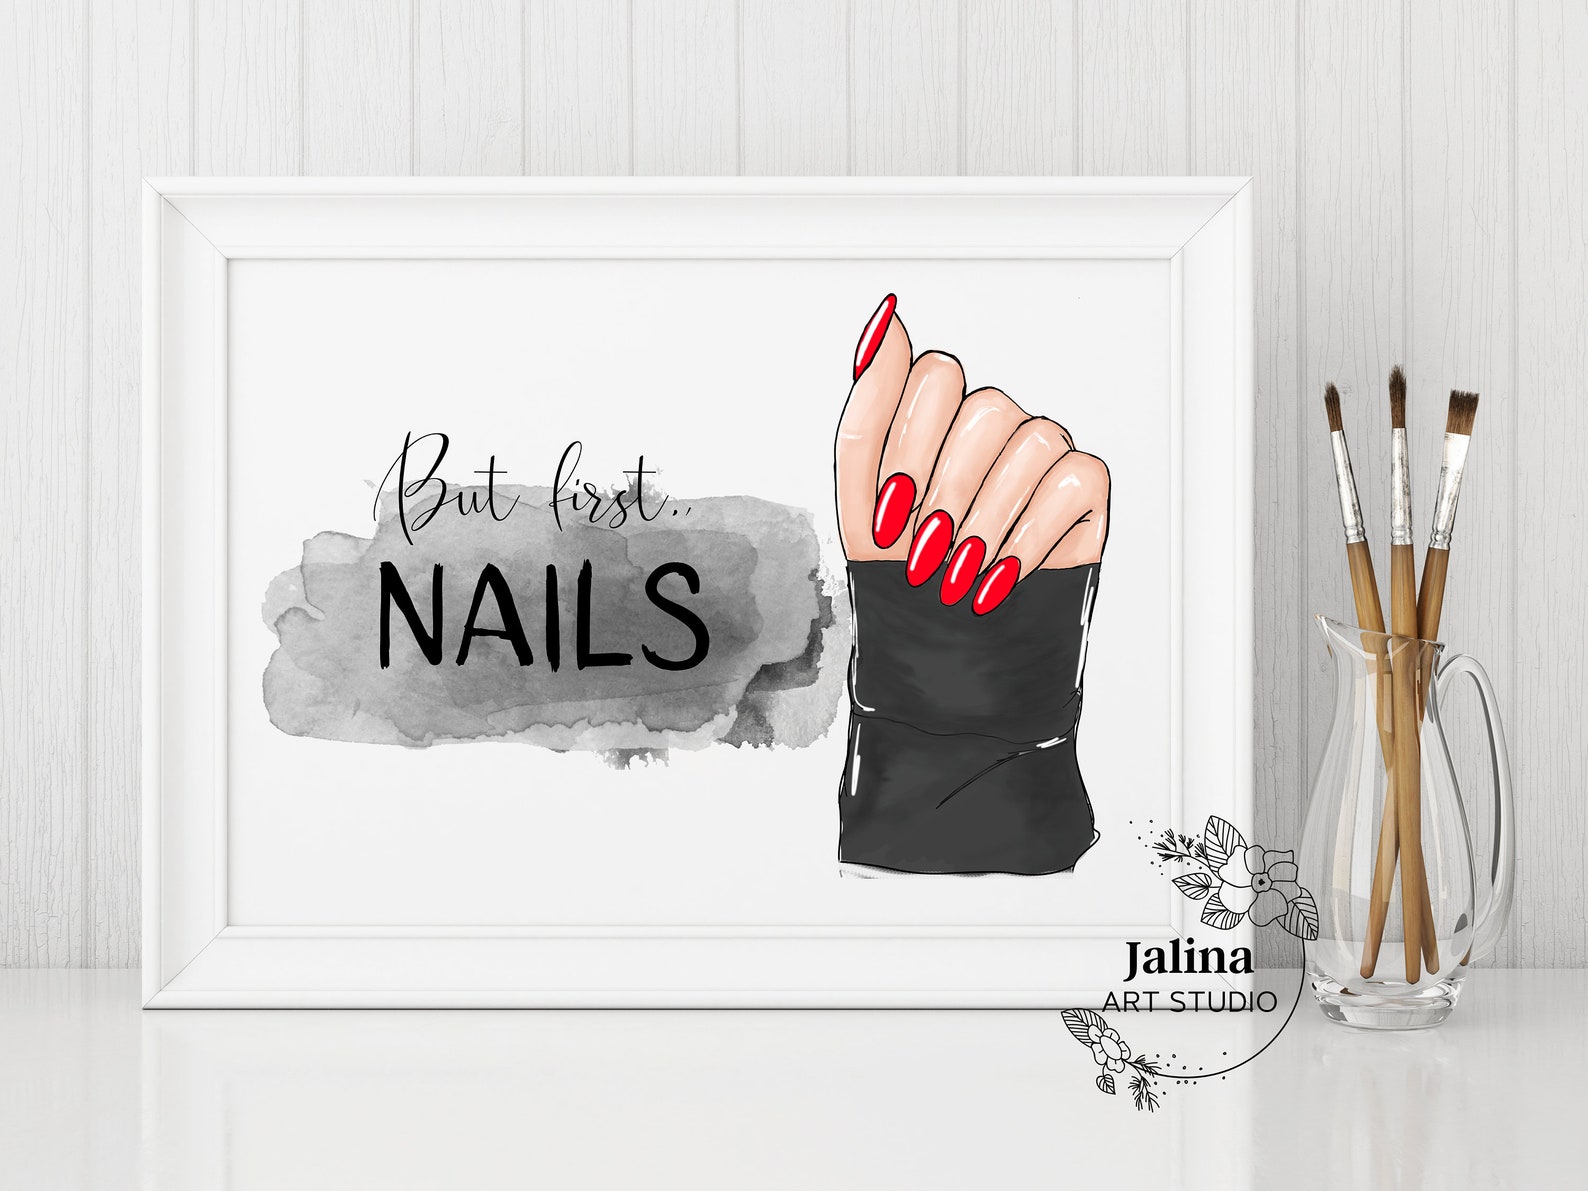 "Nail art is like jewelry for your nails." - wide 2